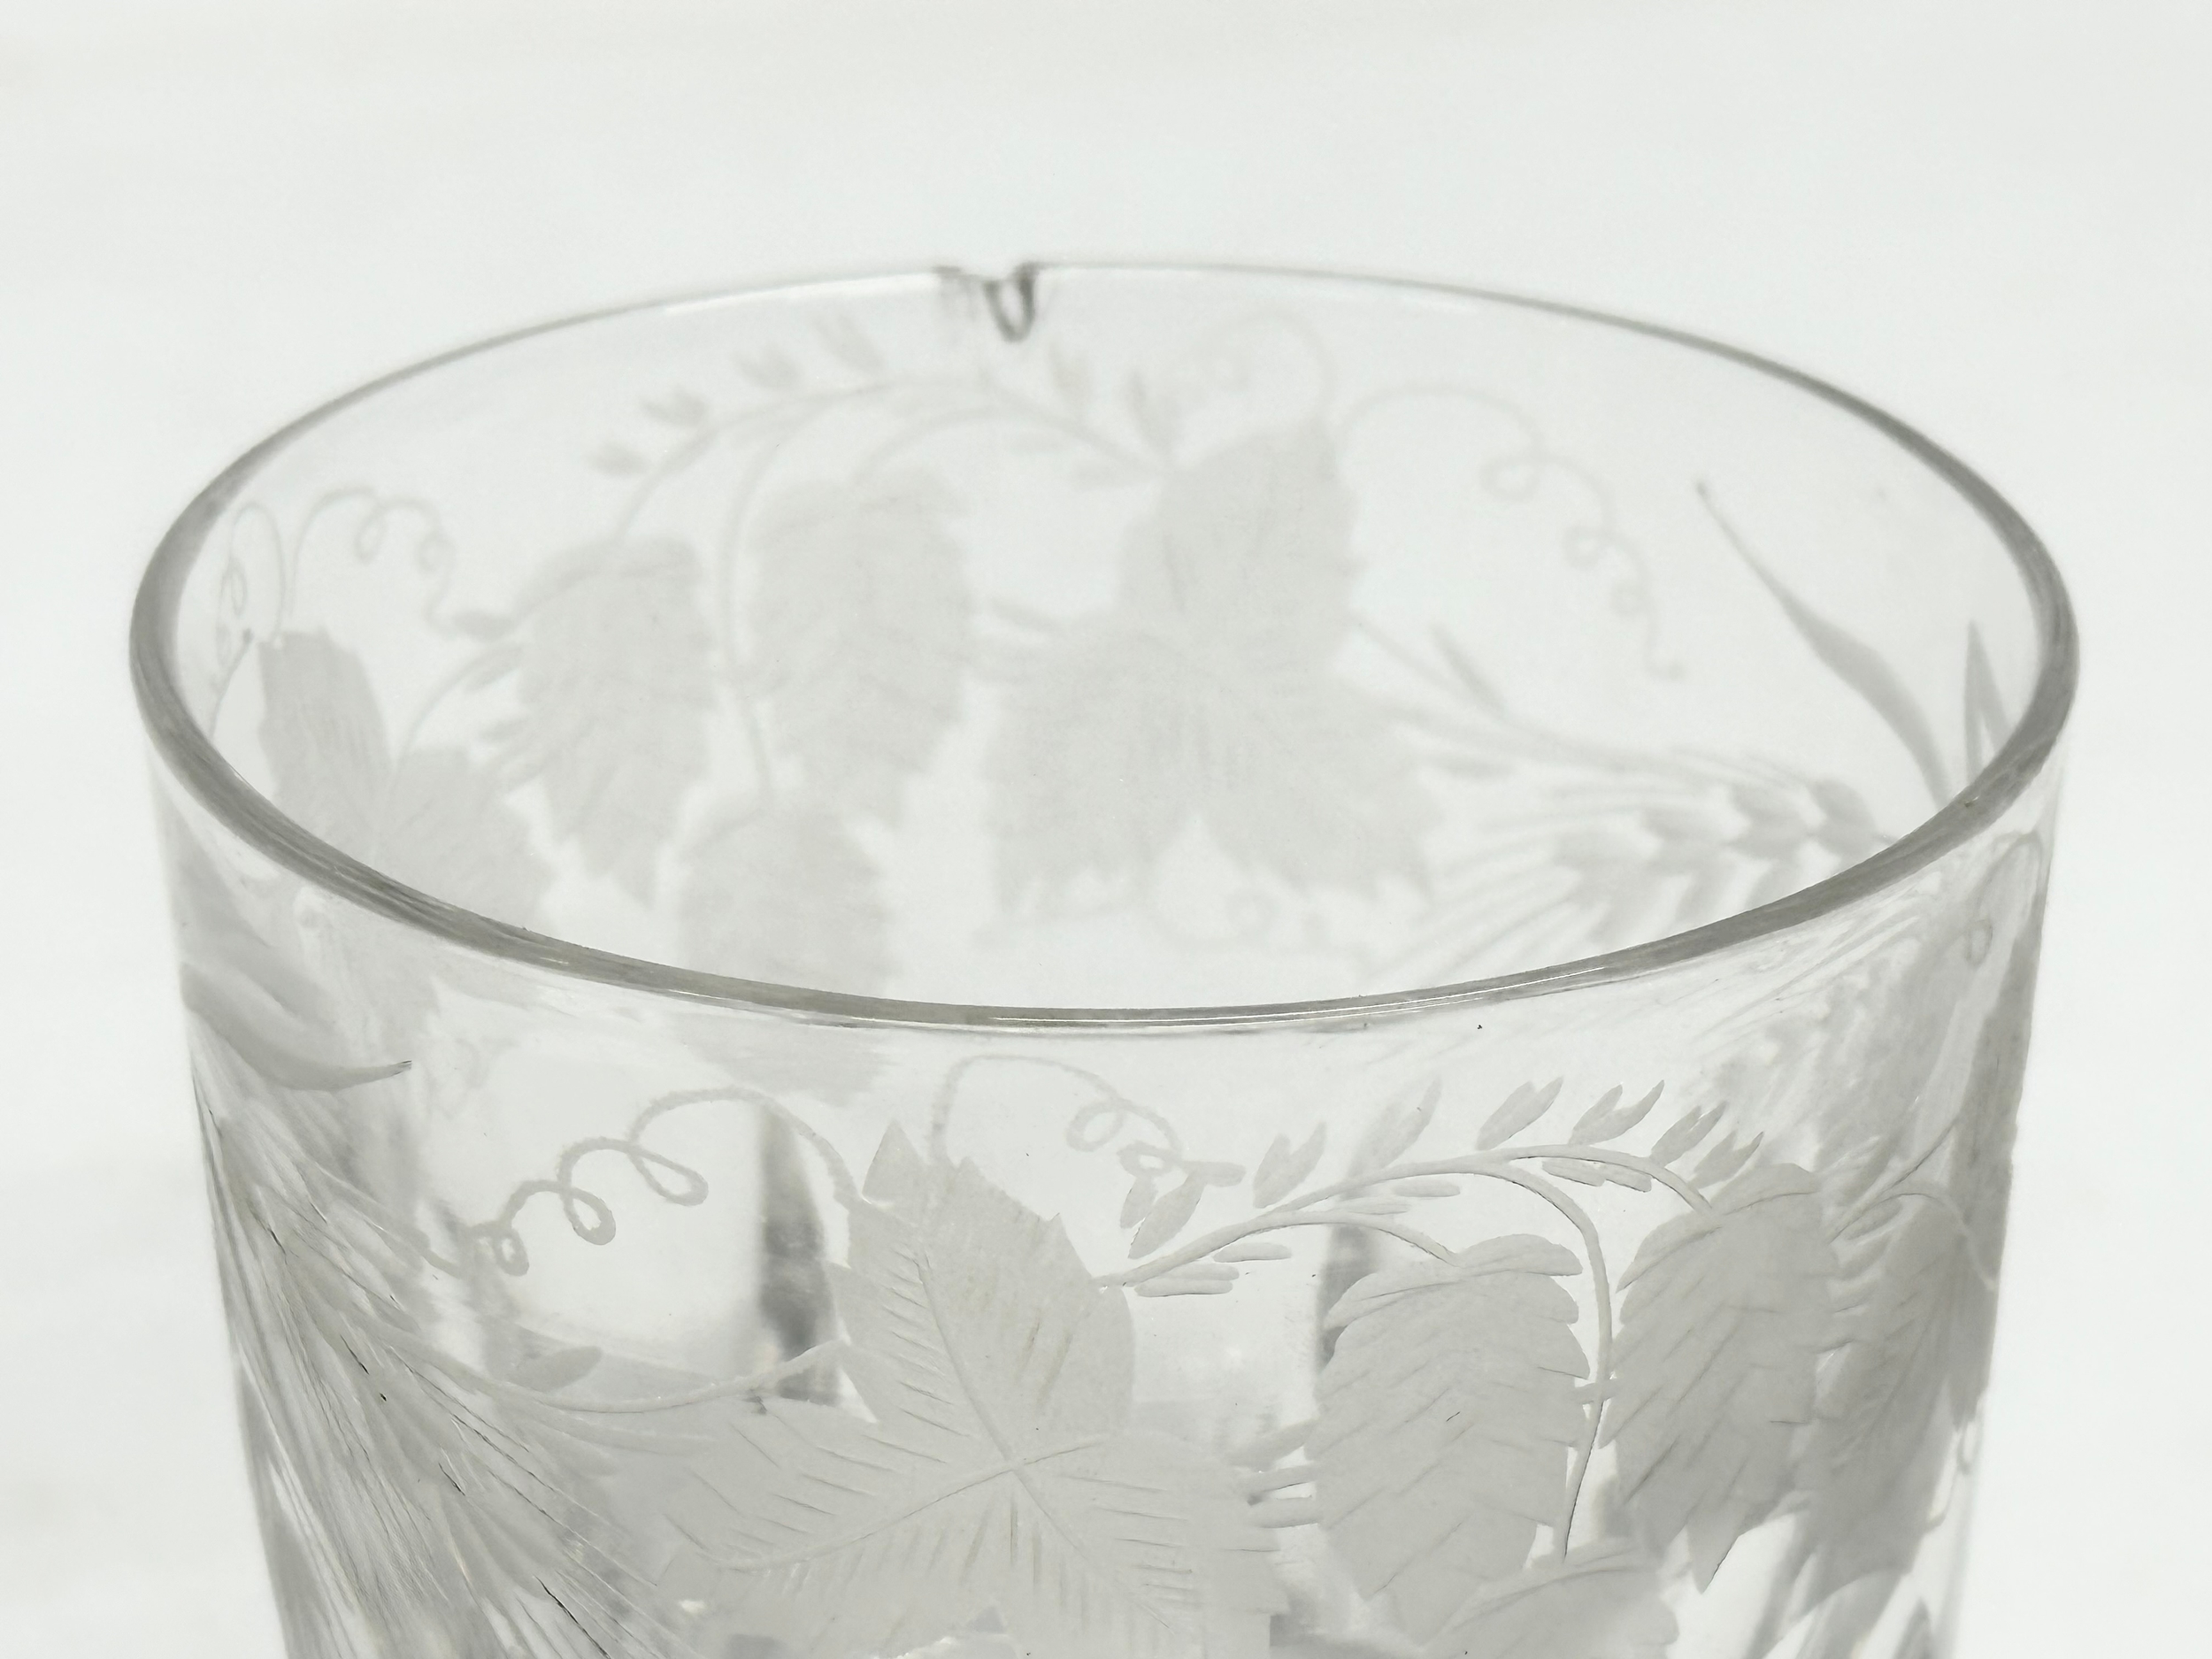 A rare Victorian ‘Last Drop’ whisky glass with etched leaves and pinecones. Circa 1860-1880. 9x9.5cm - Bild 2 aus 5